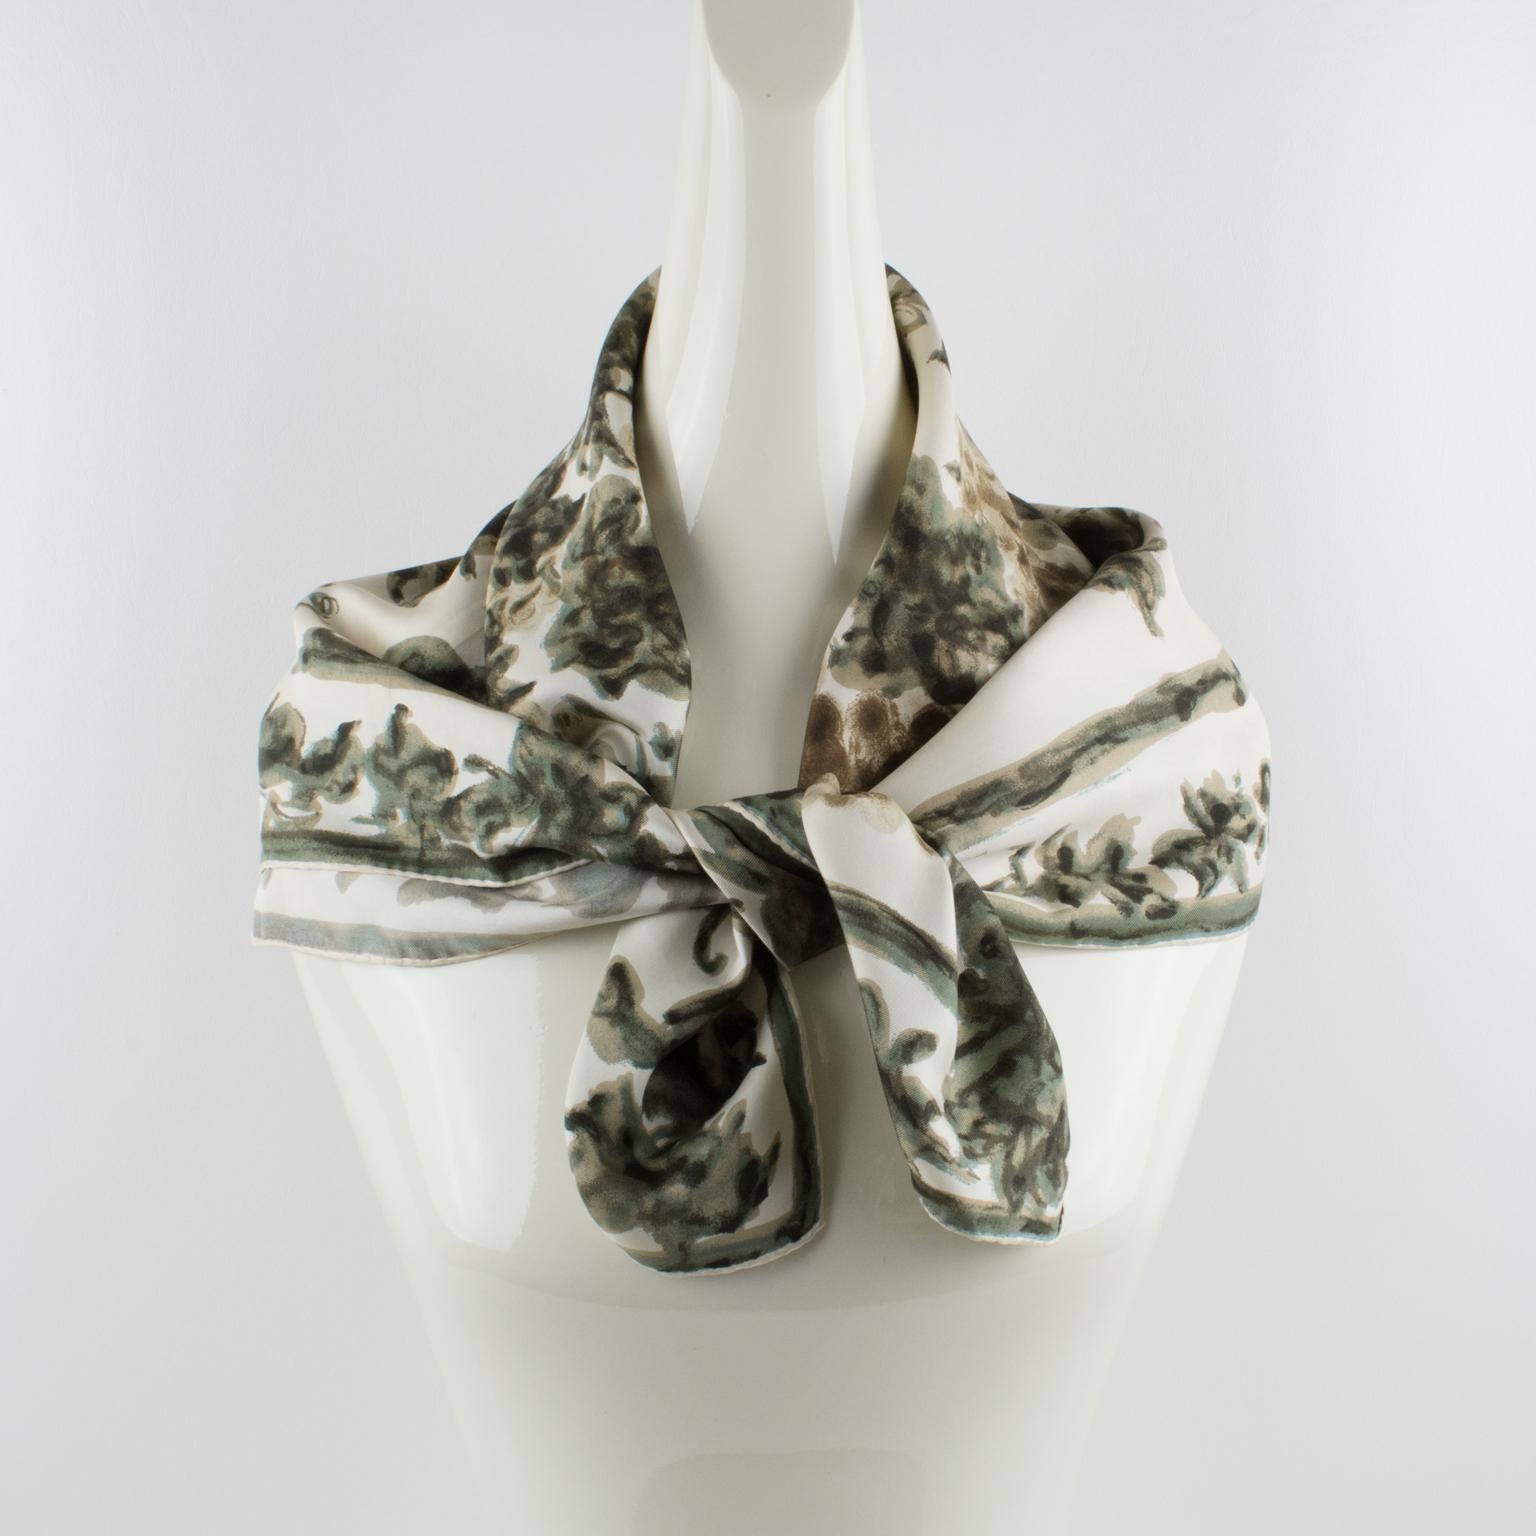 This exquisite silk scarf from Pierre Balmain Paris is artistically crafted to resemble a beautiful painting. This lovely piece features a tangle of grape leaves and bunches of grapes in a combination of sage green, light brown, and beige colors on